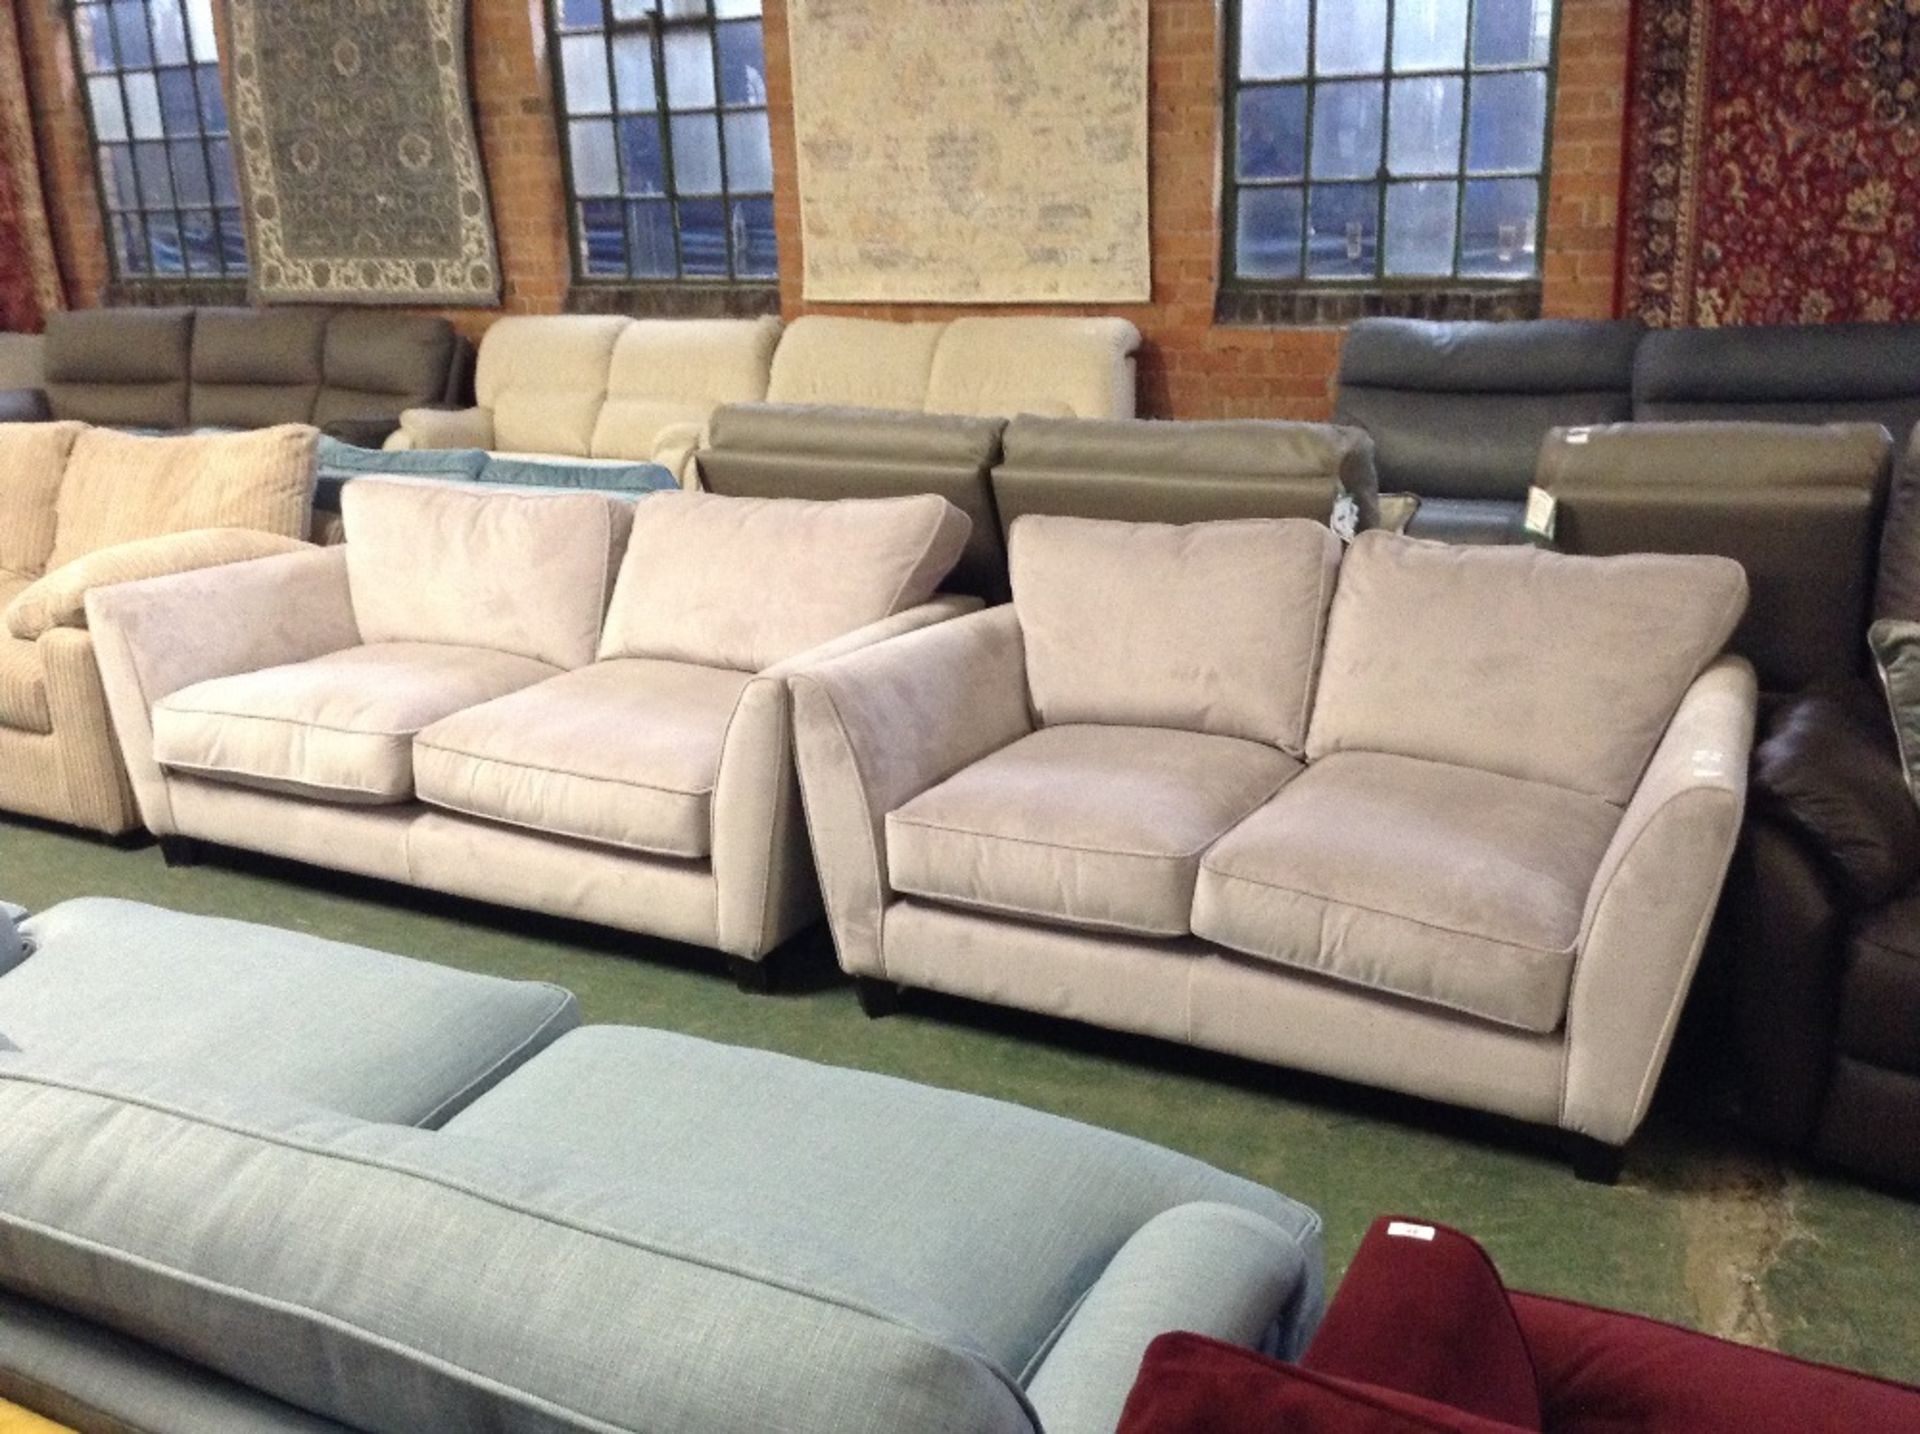 LILAC 3 SEATER SOFA AND 2 SEATER SOFA (wrapped) (2)